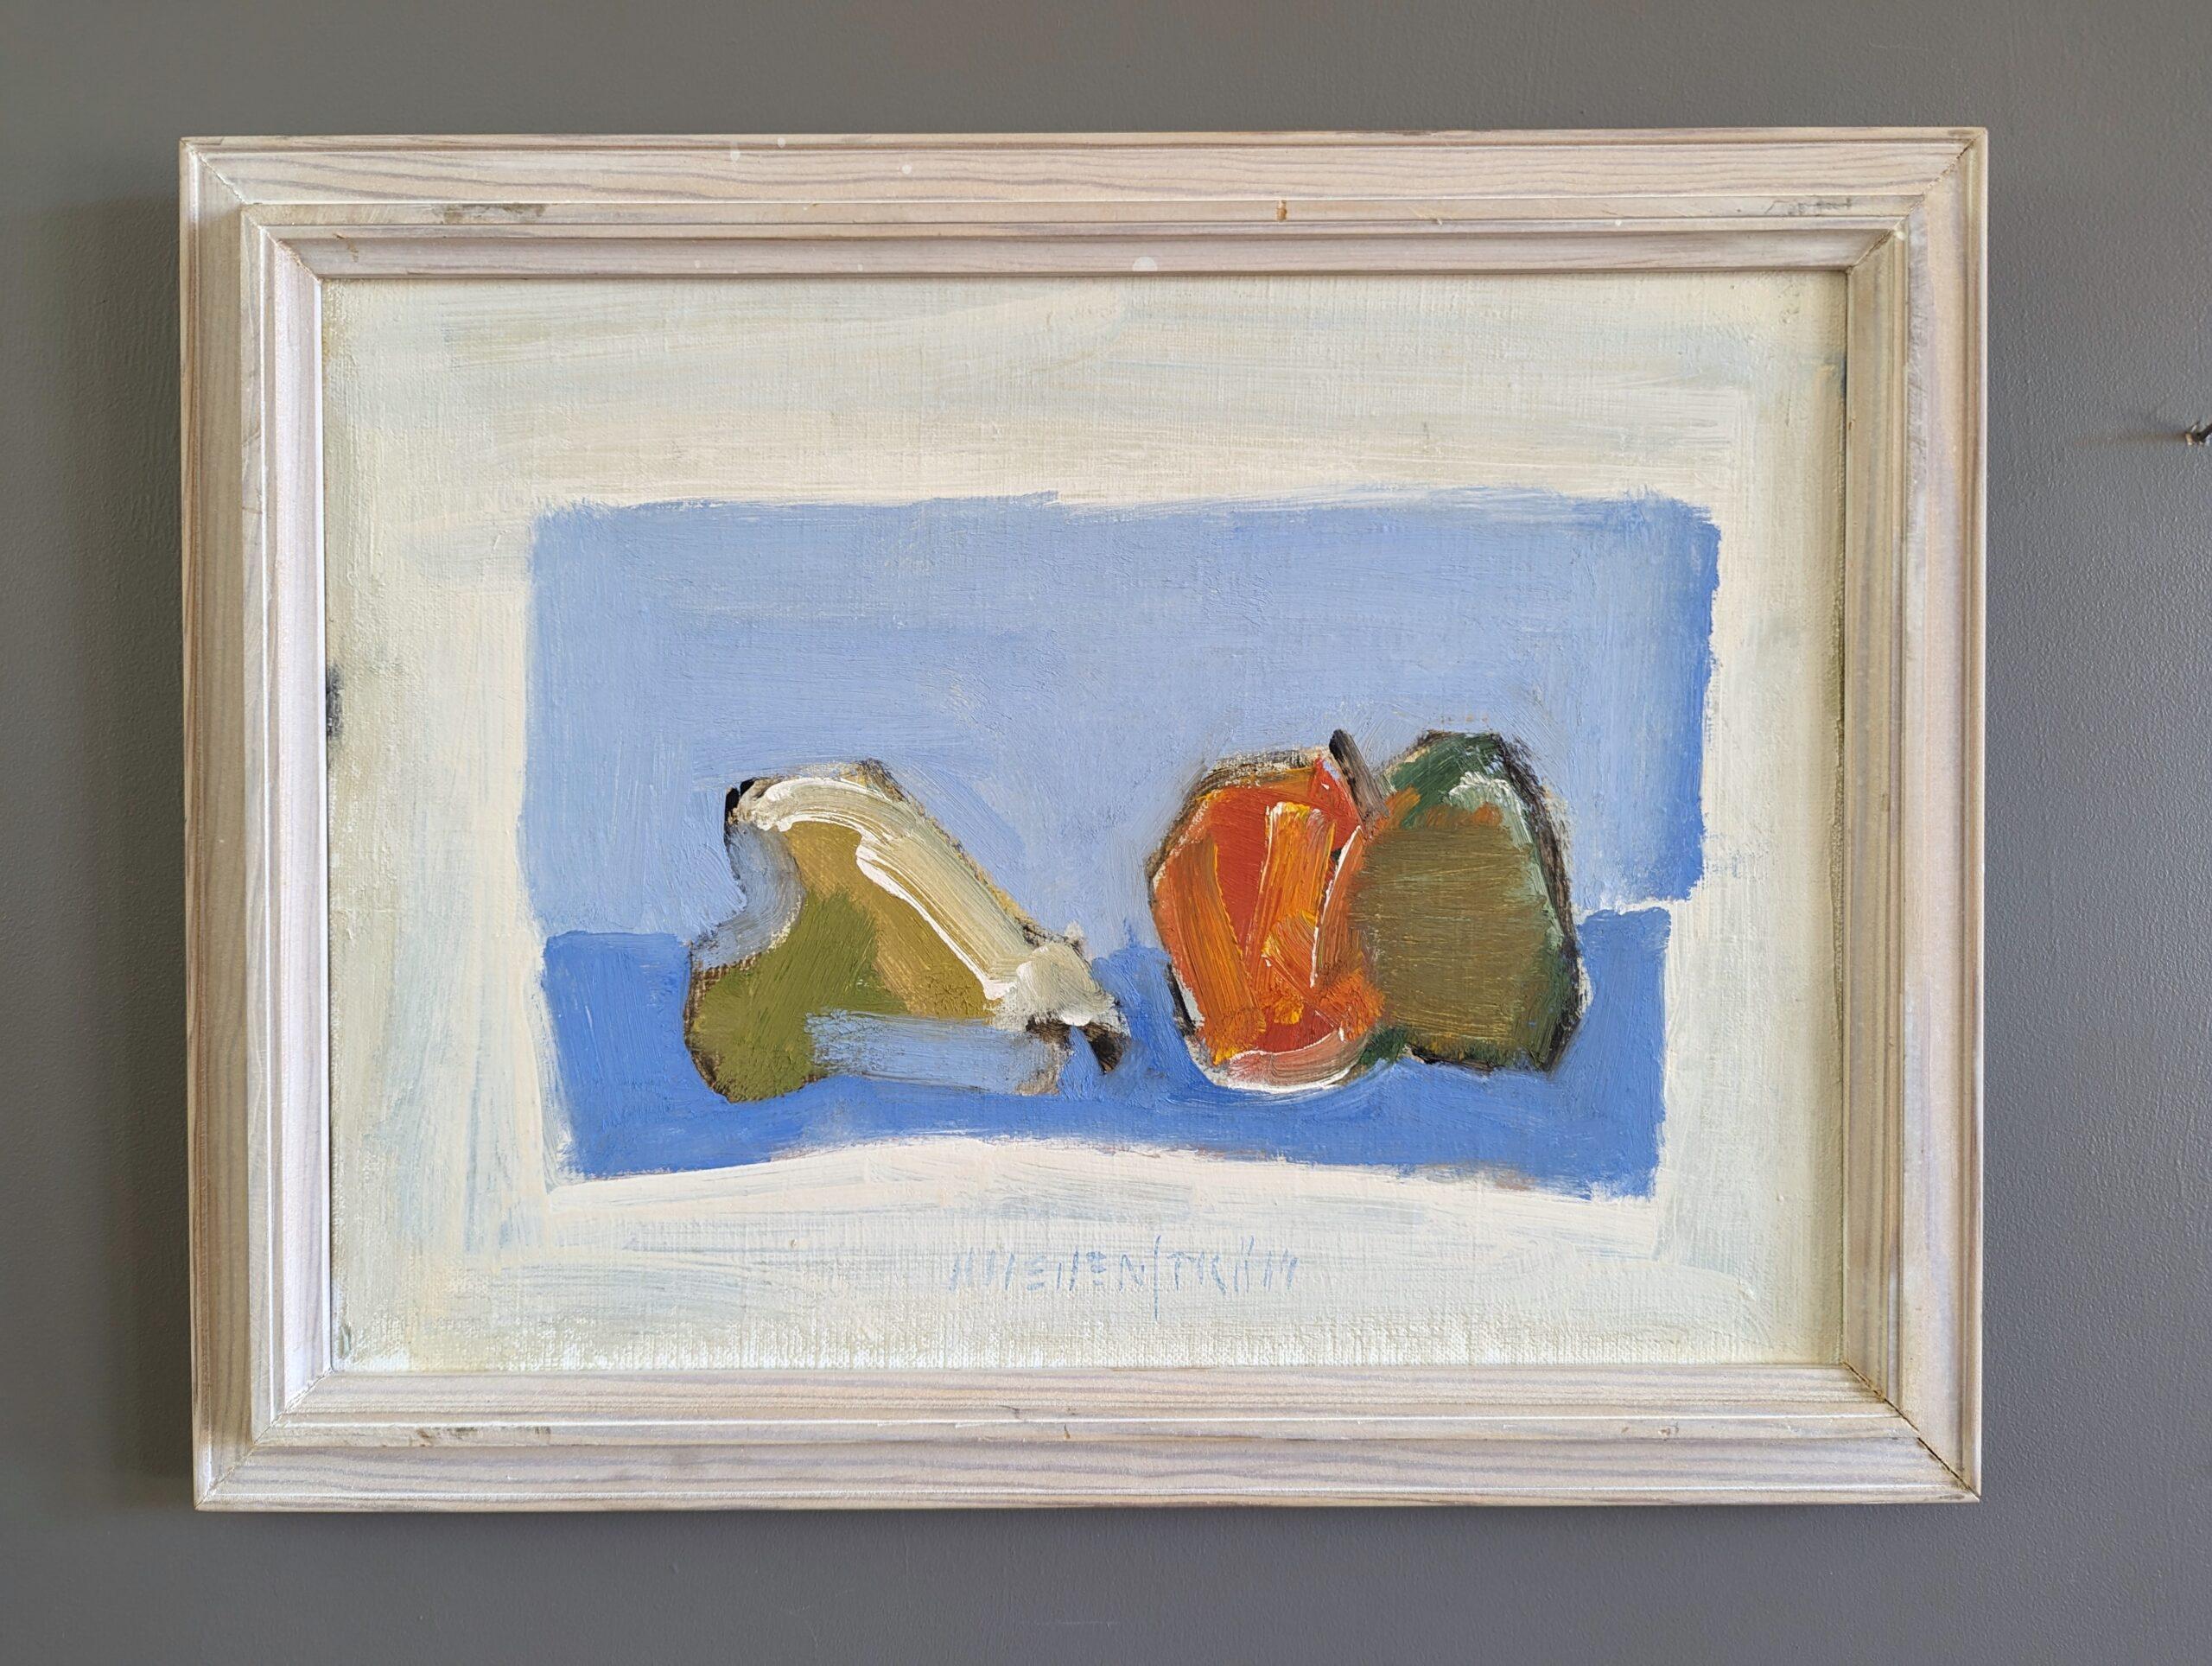 FRUIT FRAME
Size: 30 x 39 cm (including frame)
Oil on Canvas

A captivating semi-abstract still life composition with a minimalist vibe, executed in oil onto canvas.

Against a backdrop of soothing grey, a block of tranquil blue provides contrast,